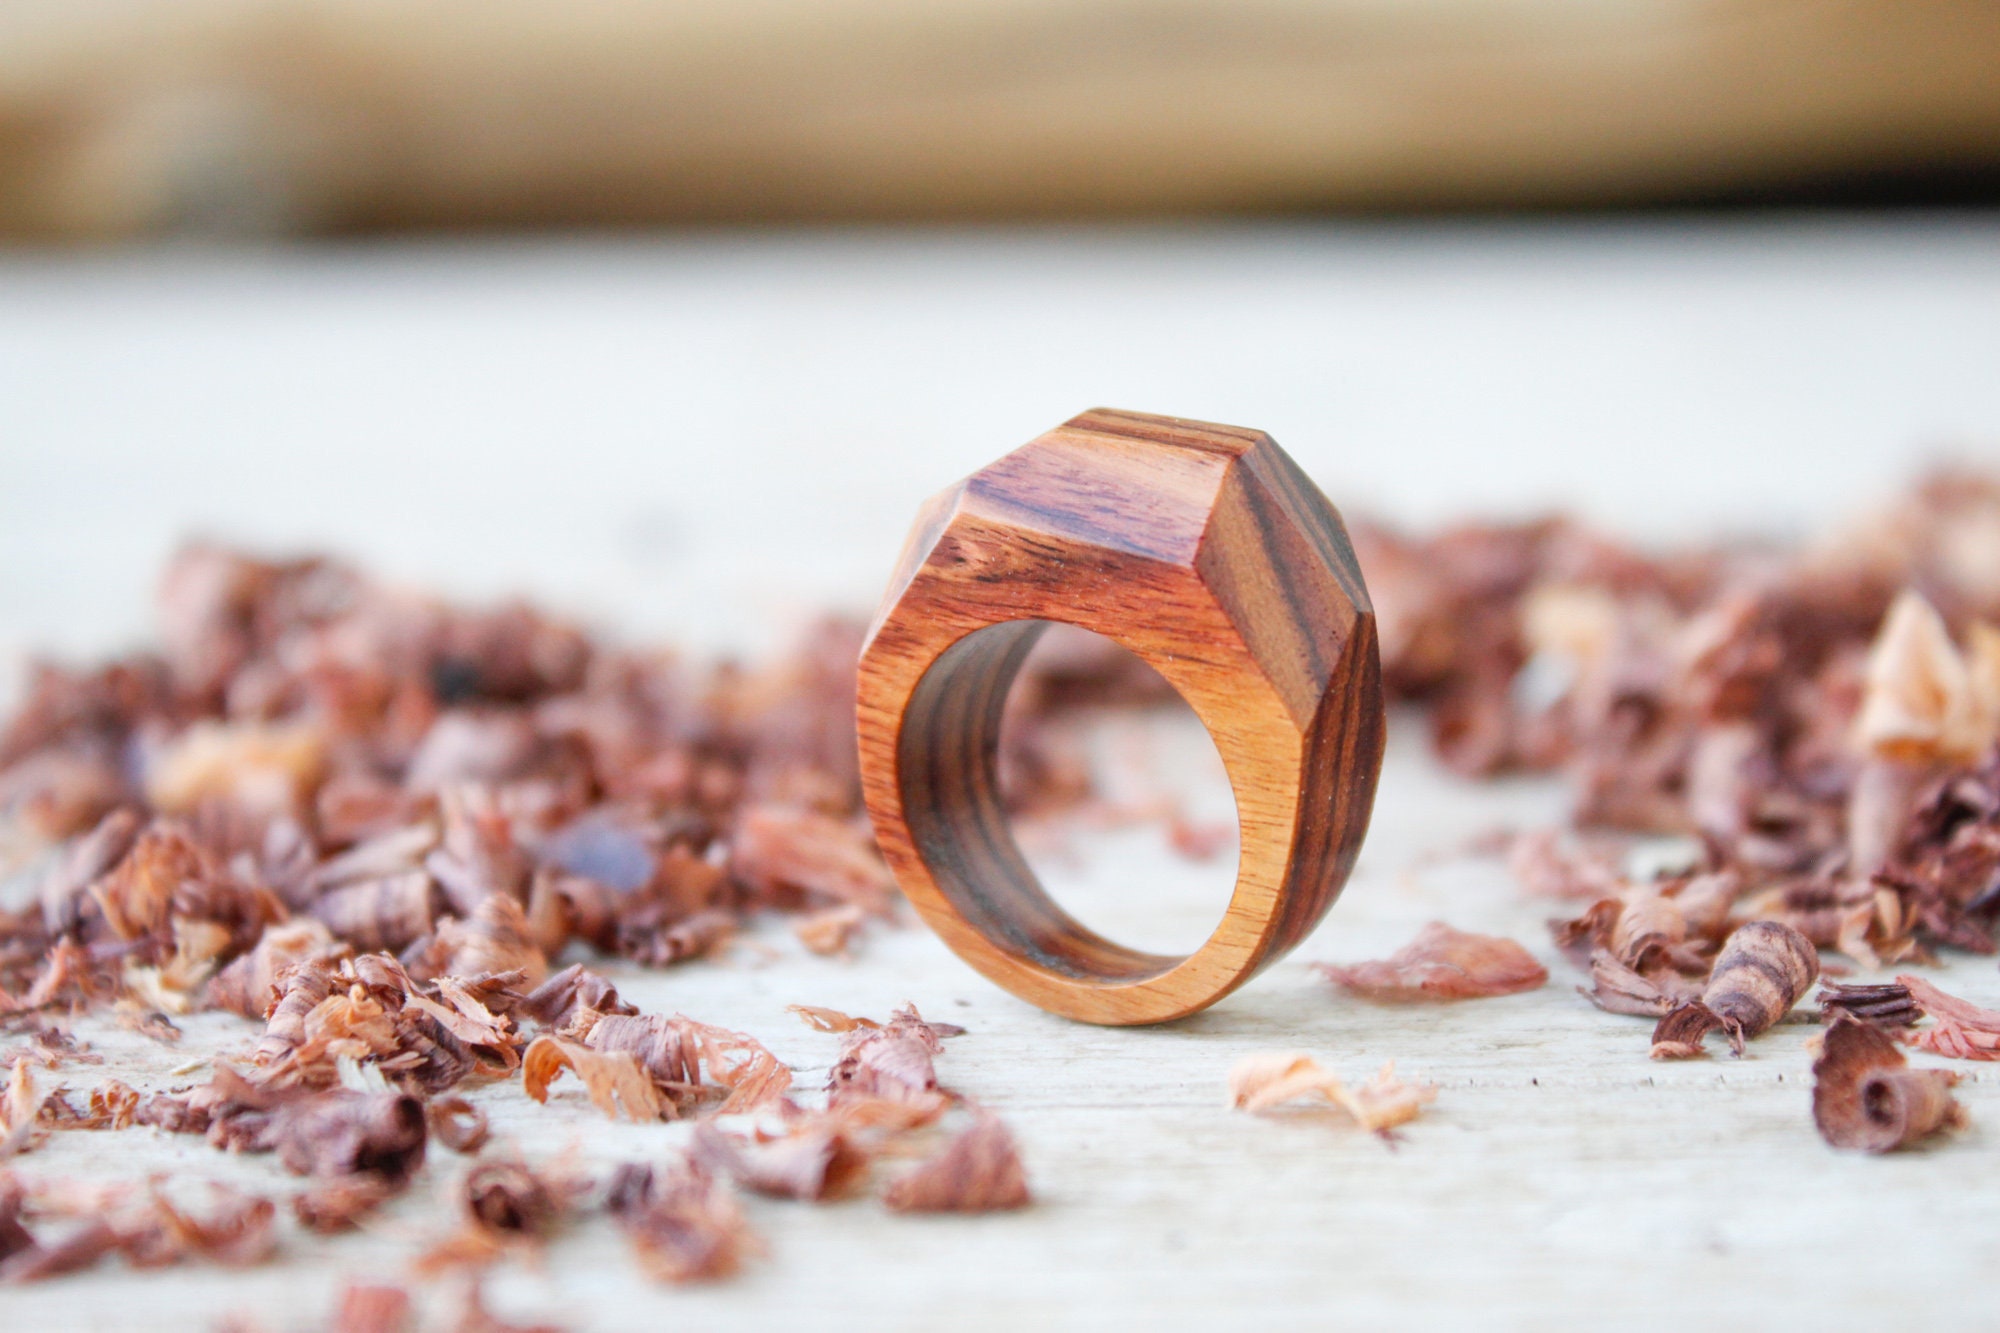 Wood ring for men and woman, wooden wedding handmade ring, wooden jewelry,  engagement ring band, handmade wooden ring jewels, natural wood